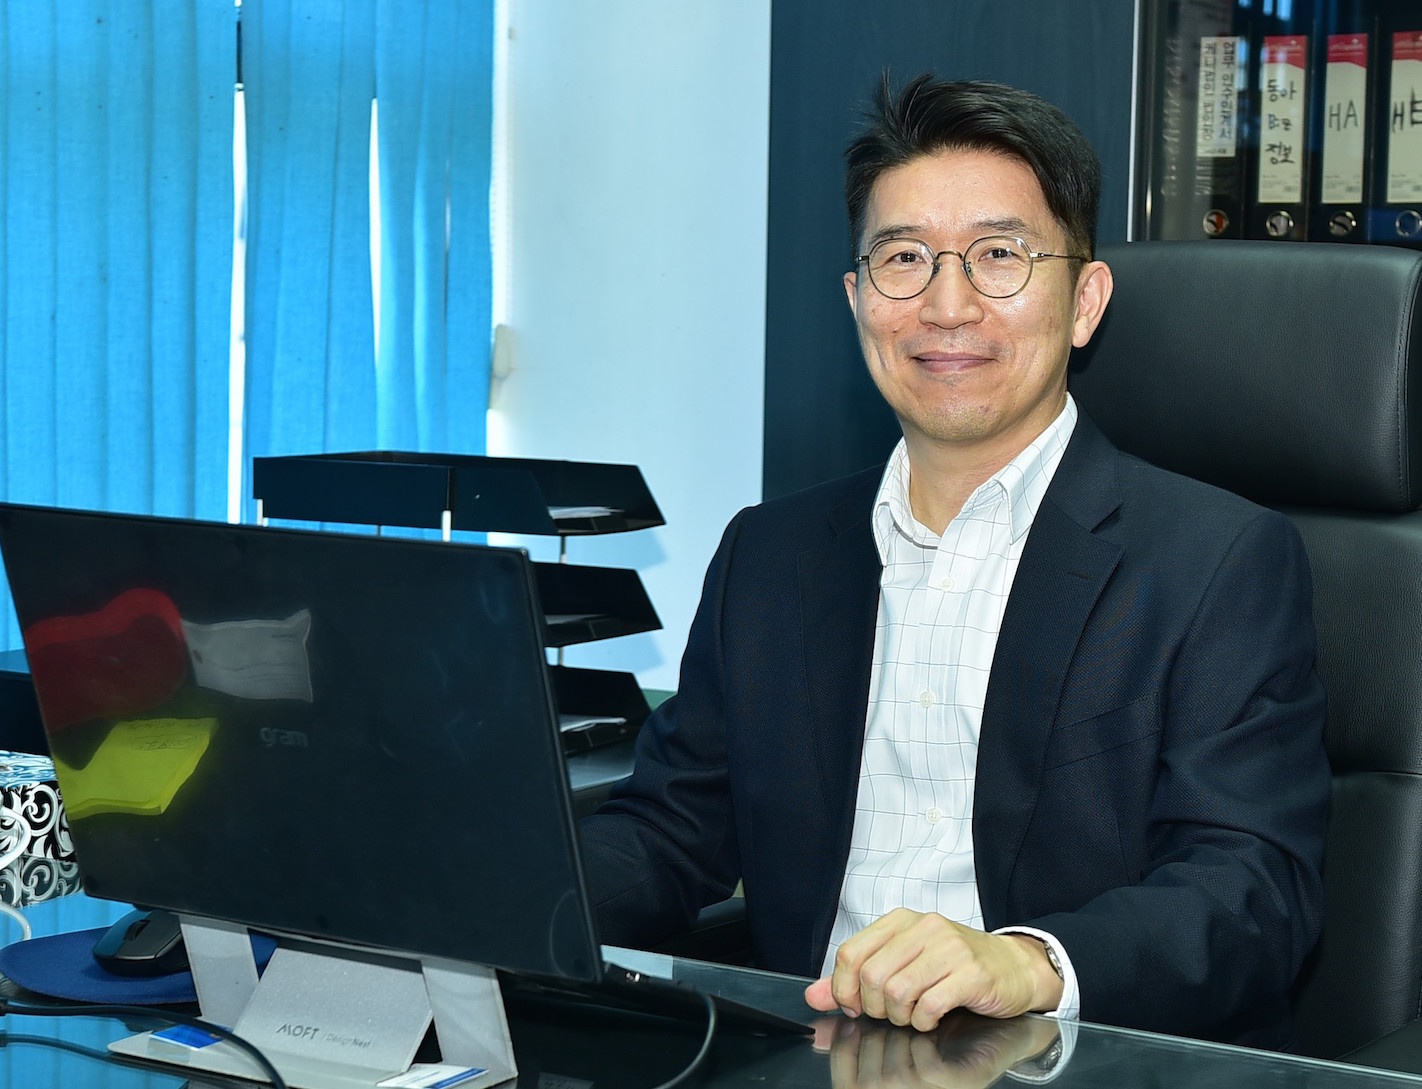 LG Managing Director For East Africa Mr. Dong Wong Lee explains why Simpler, Stylish Home Appliances Deliver More Value To Customers. PHOTO/COURTESY